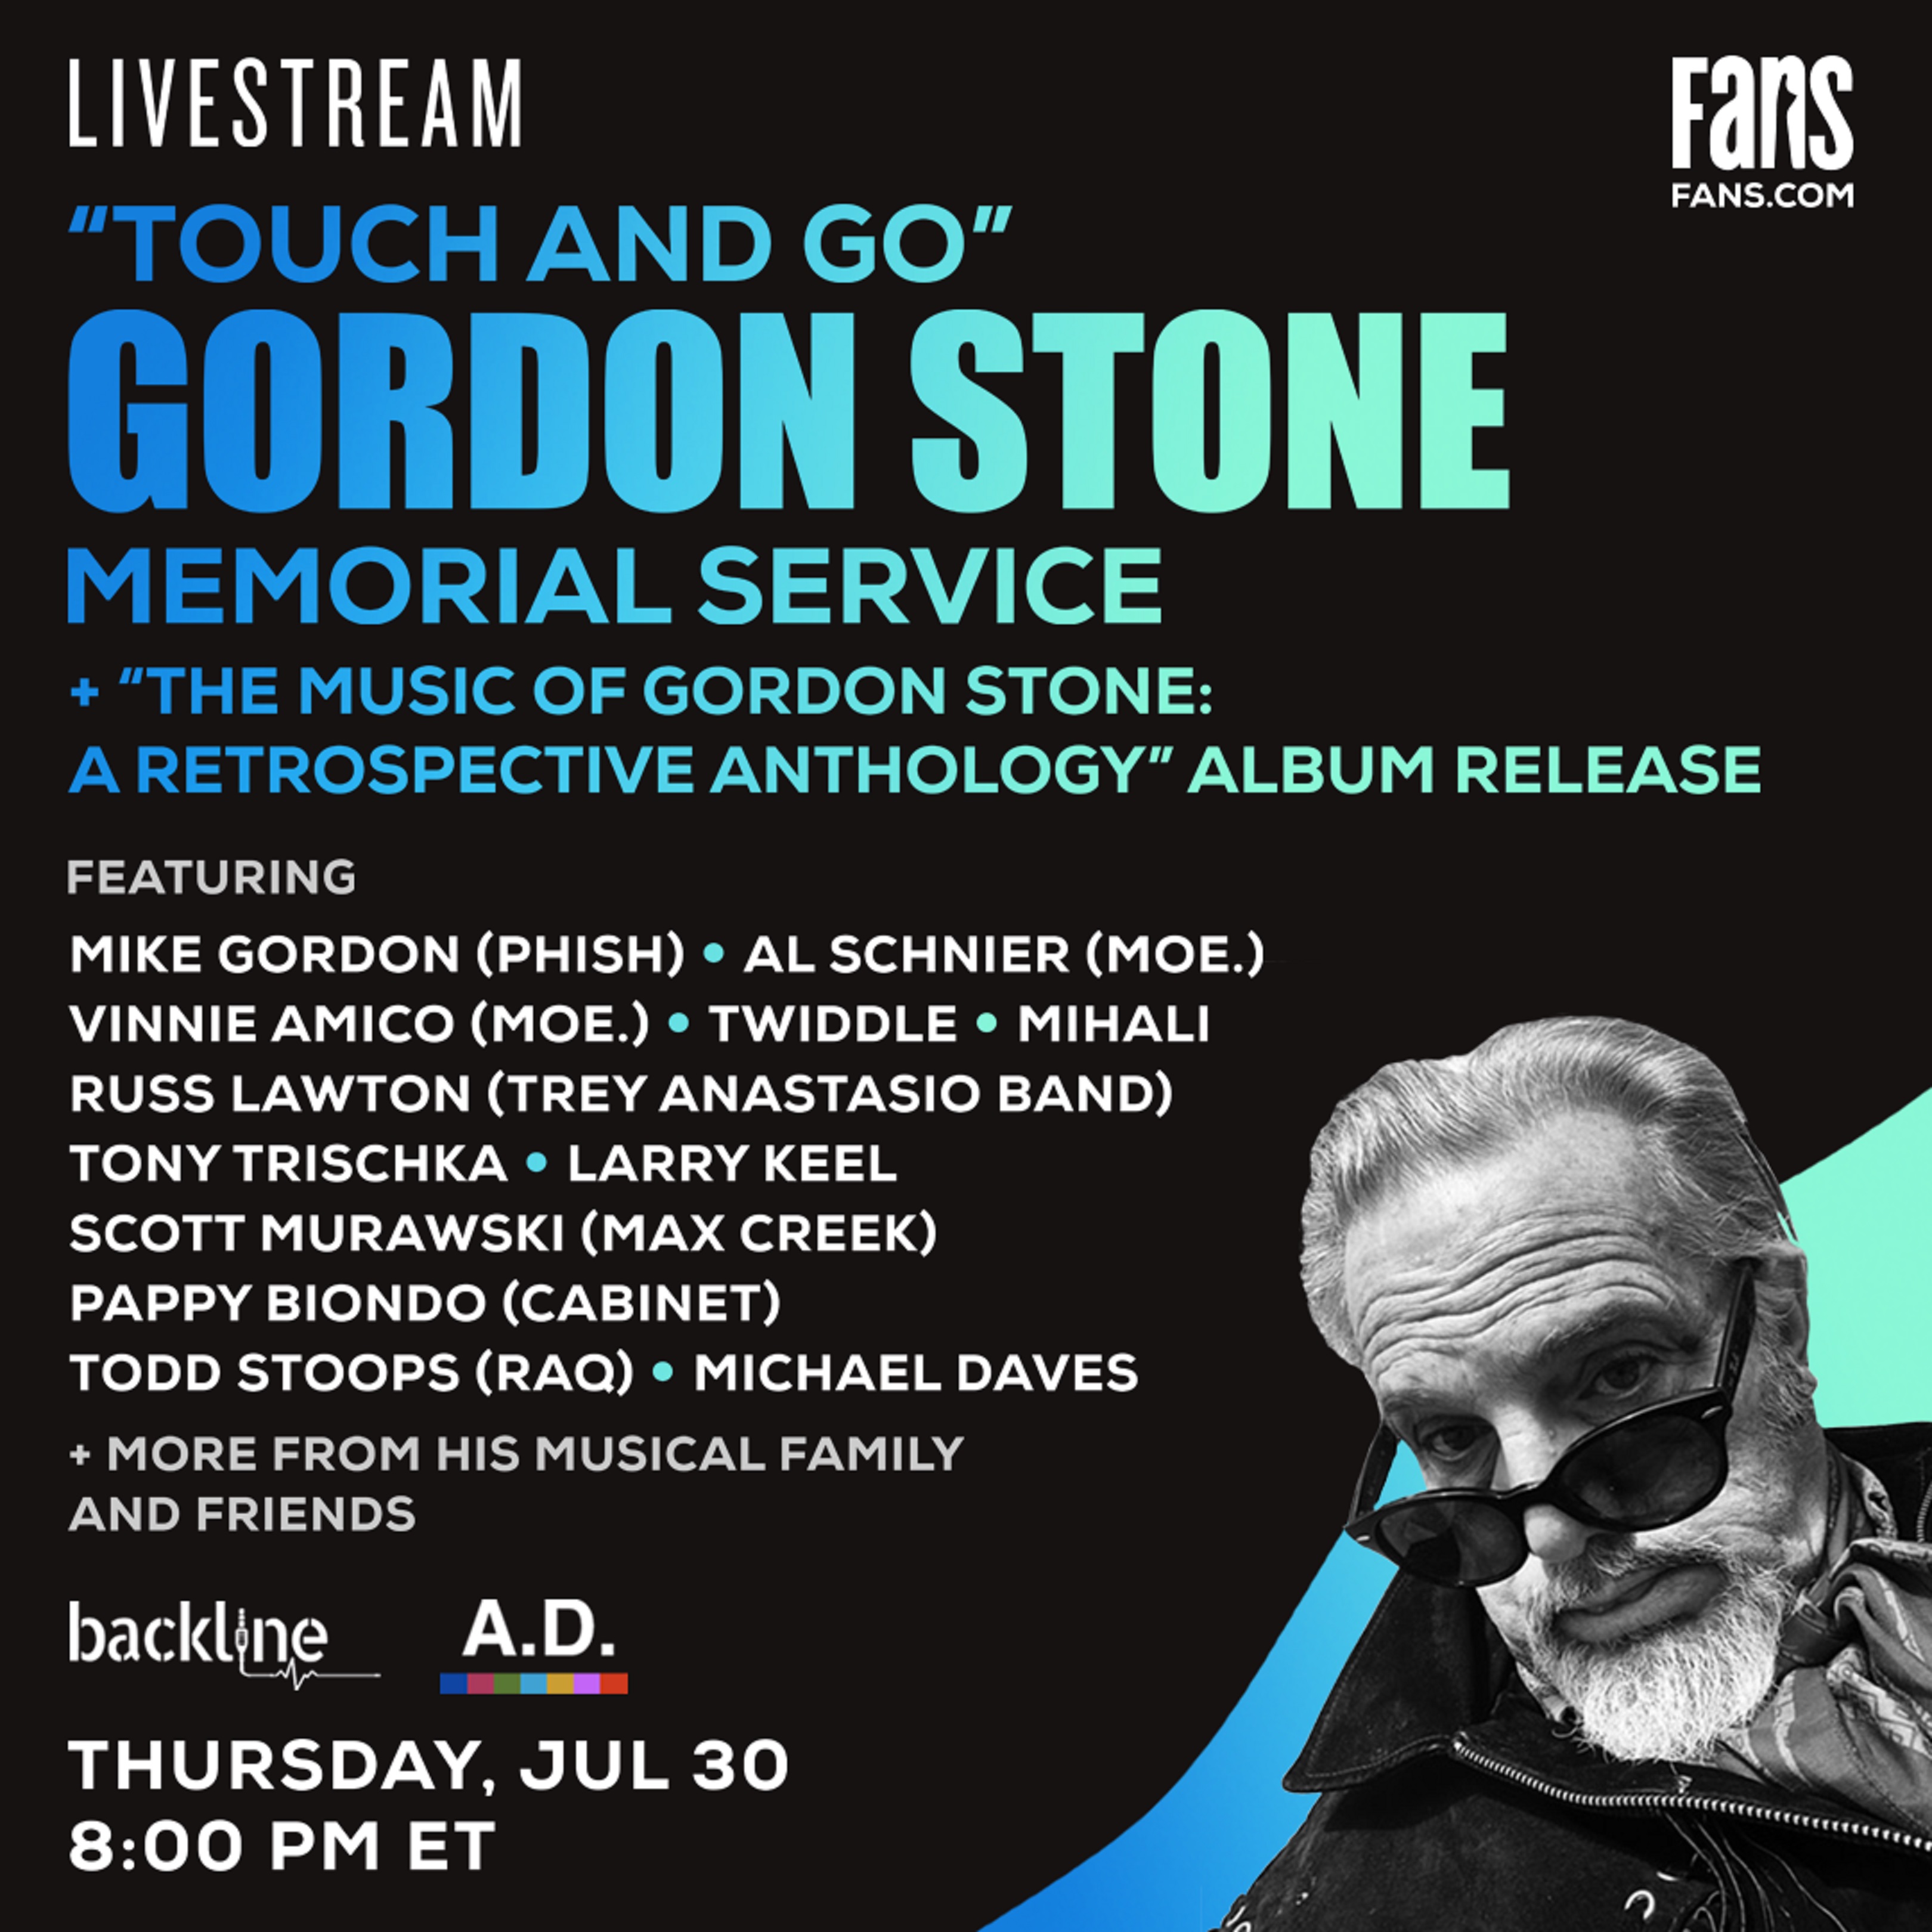 The Life of Gordon Stone To Be Celebrated With Anthology Release & Virtual Memorial Service